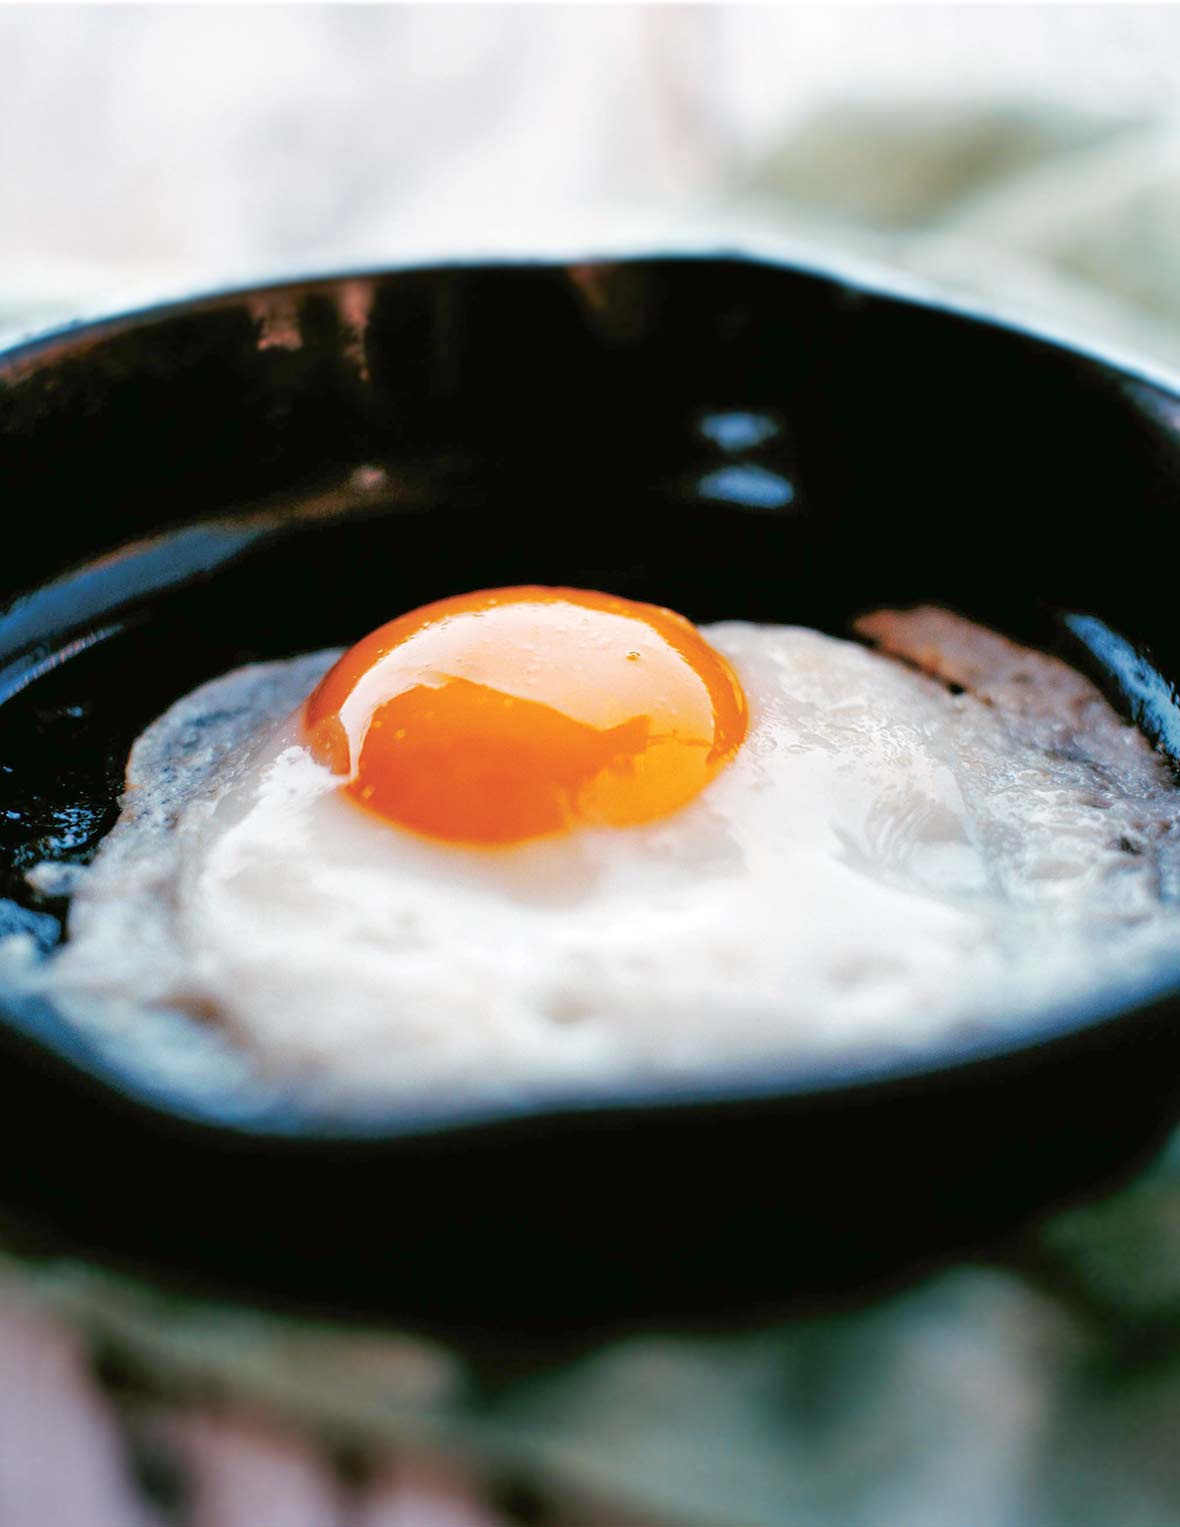 https://leitesculinaria.com/wp-content/uploads/2019/09/how-to-make-perfect-fried-egg.jpg